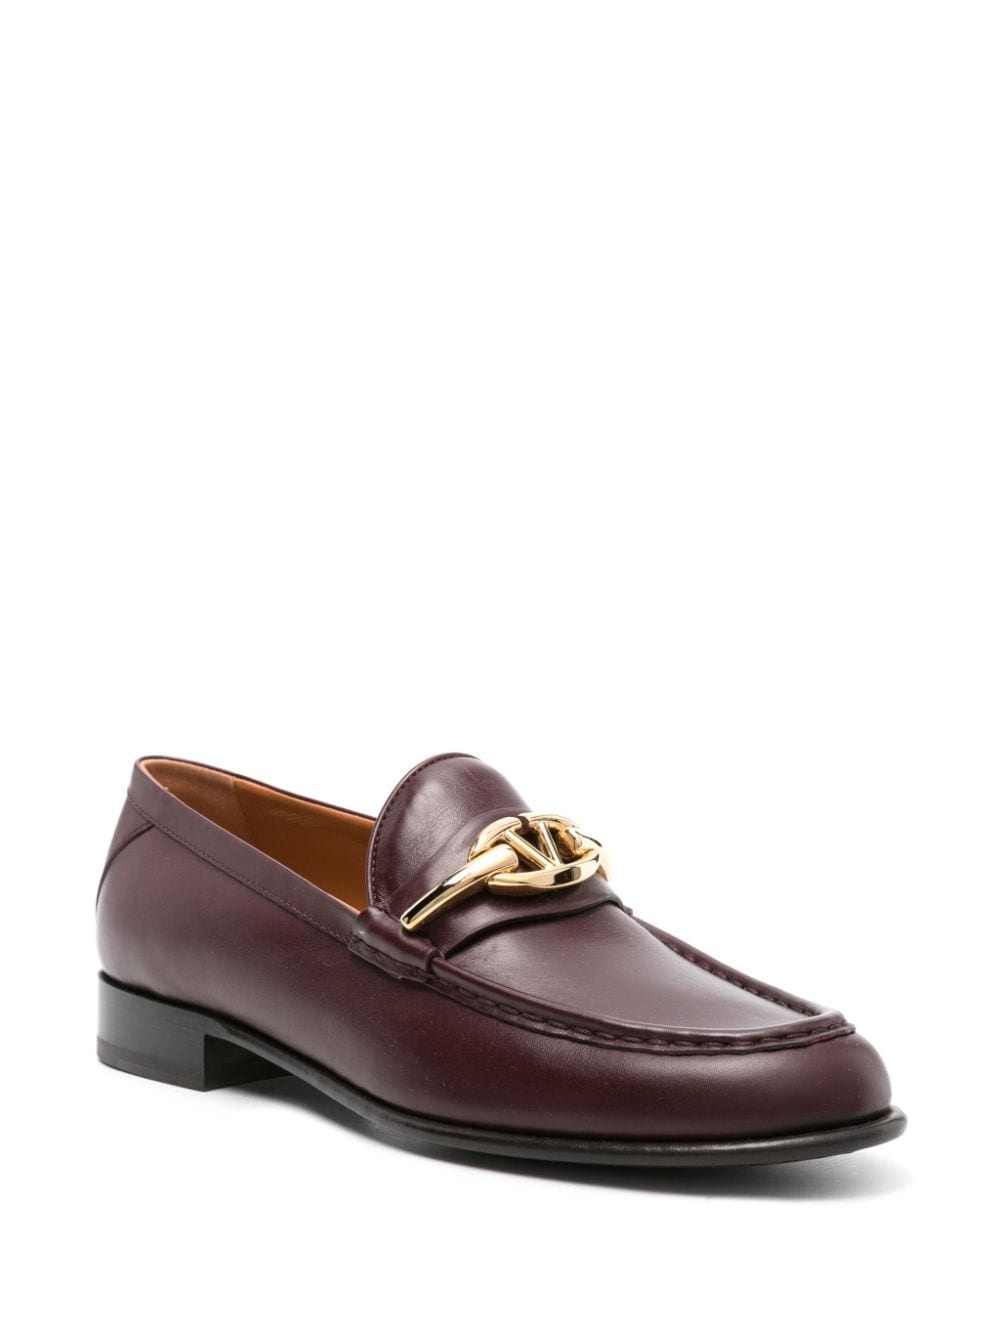 VLogo leather loafers - 2